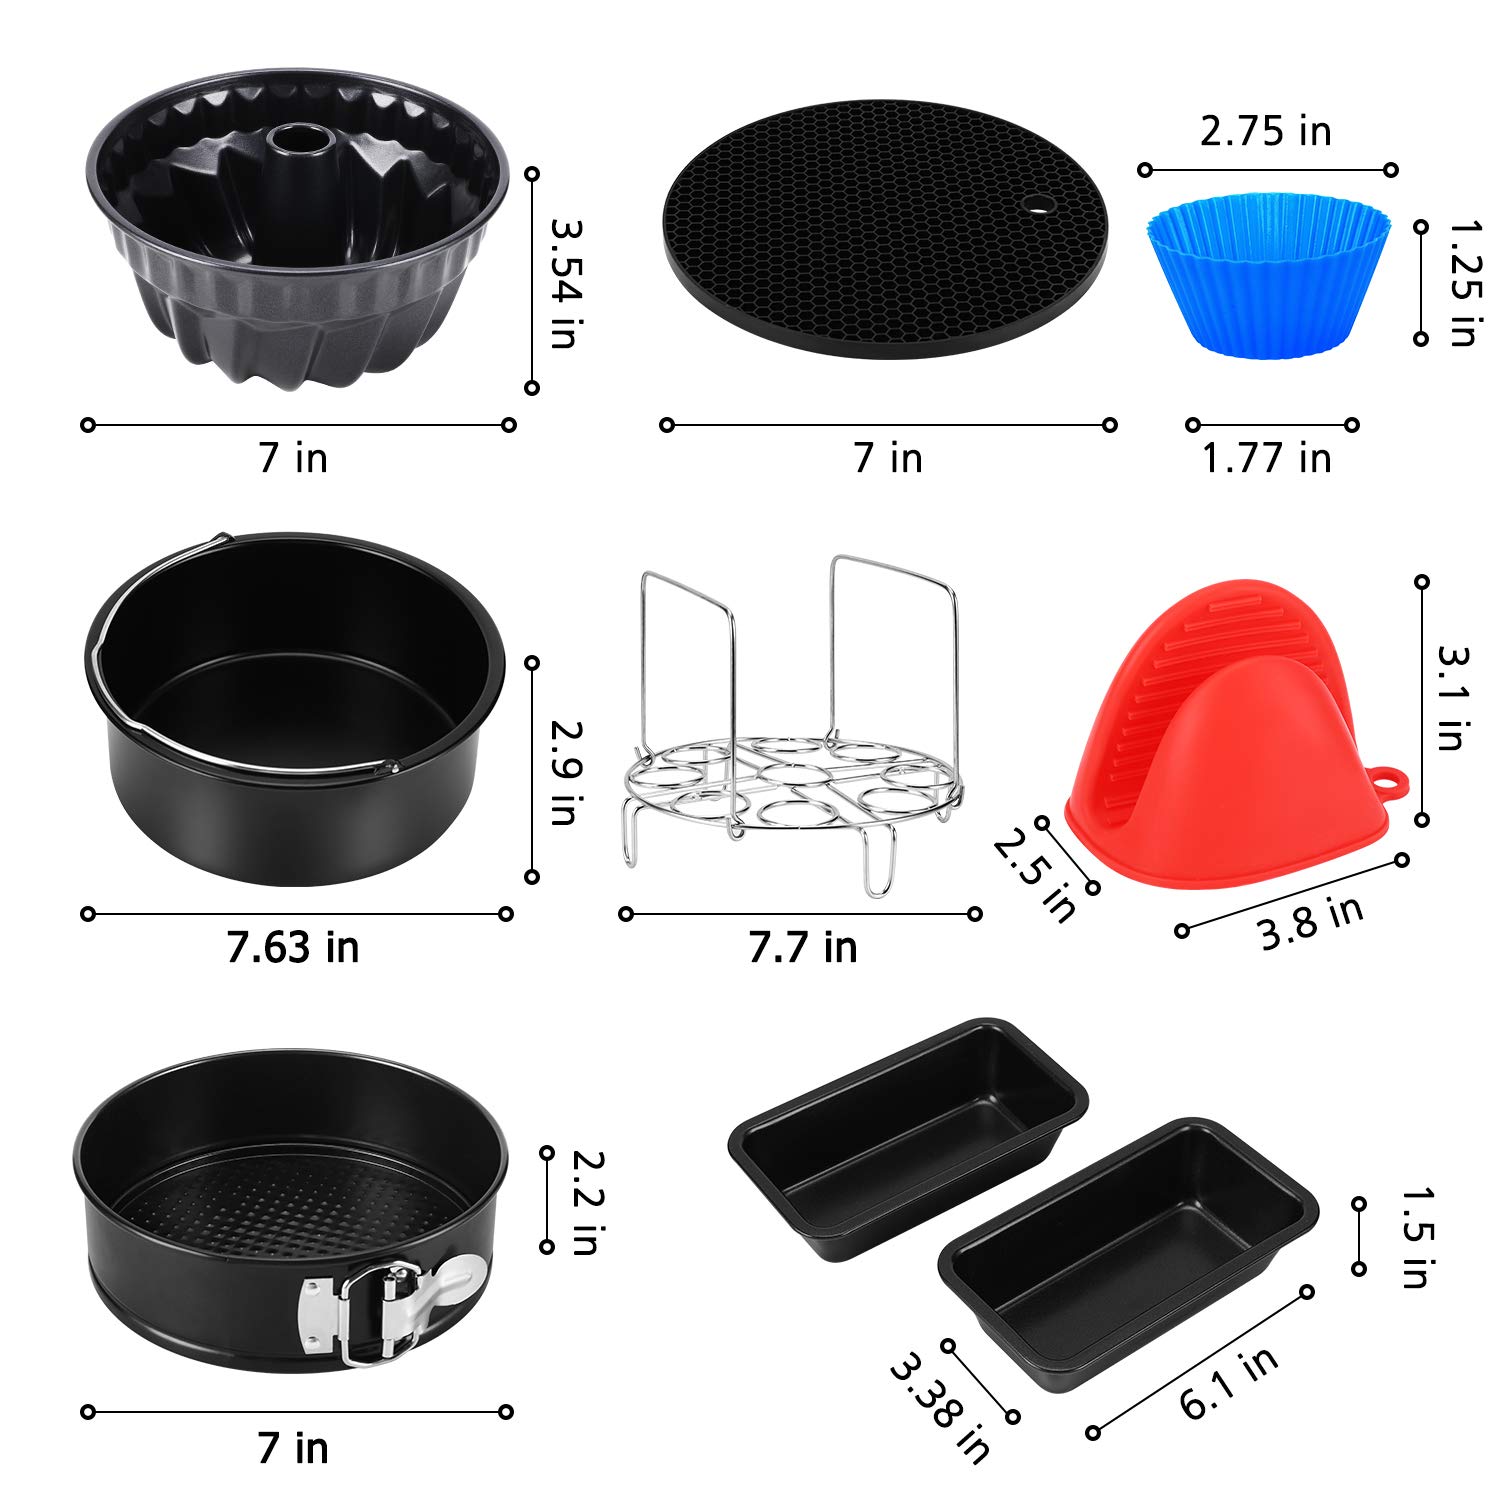 Esjay Cake Baking Pan Set Compatible with Ninja Foodi 6.5, 8Qt, Accessories Compatible with Instant Pot 6, 8Qt, Air Fryer Accessories Cake Baking Pan Set for 5.8 QT